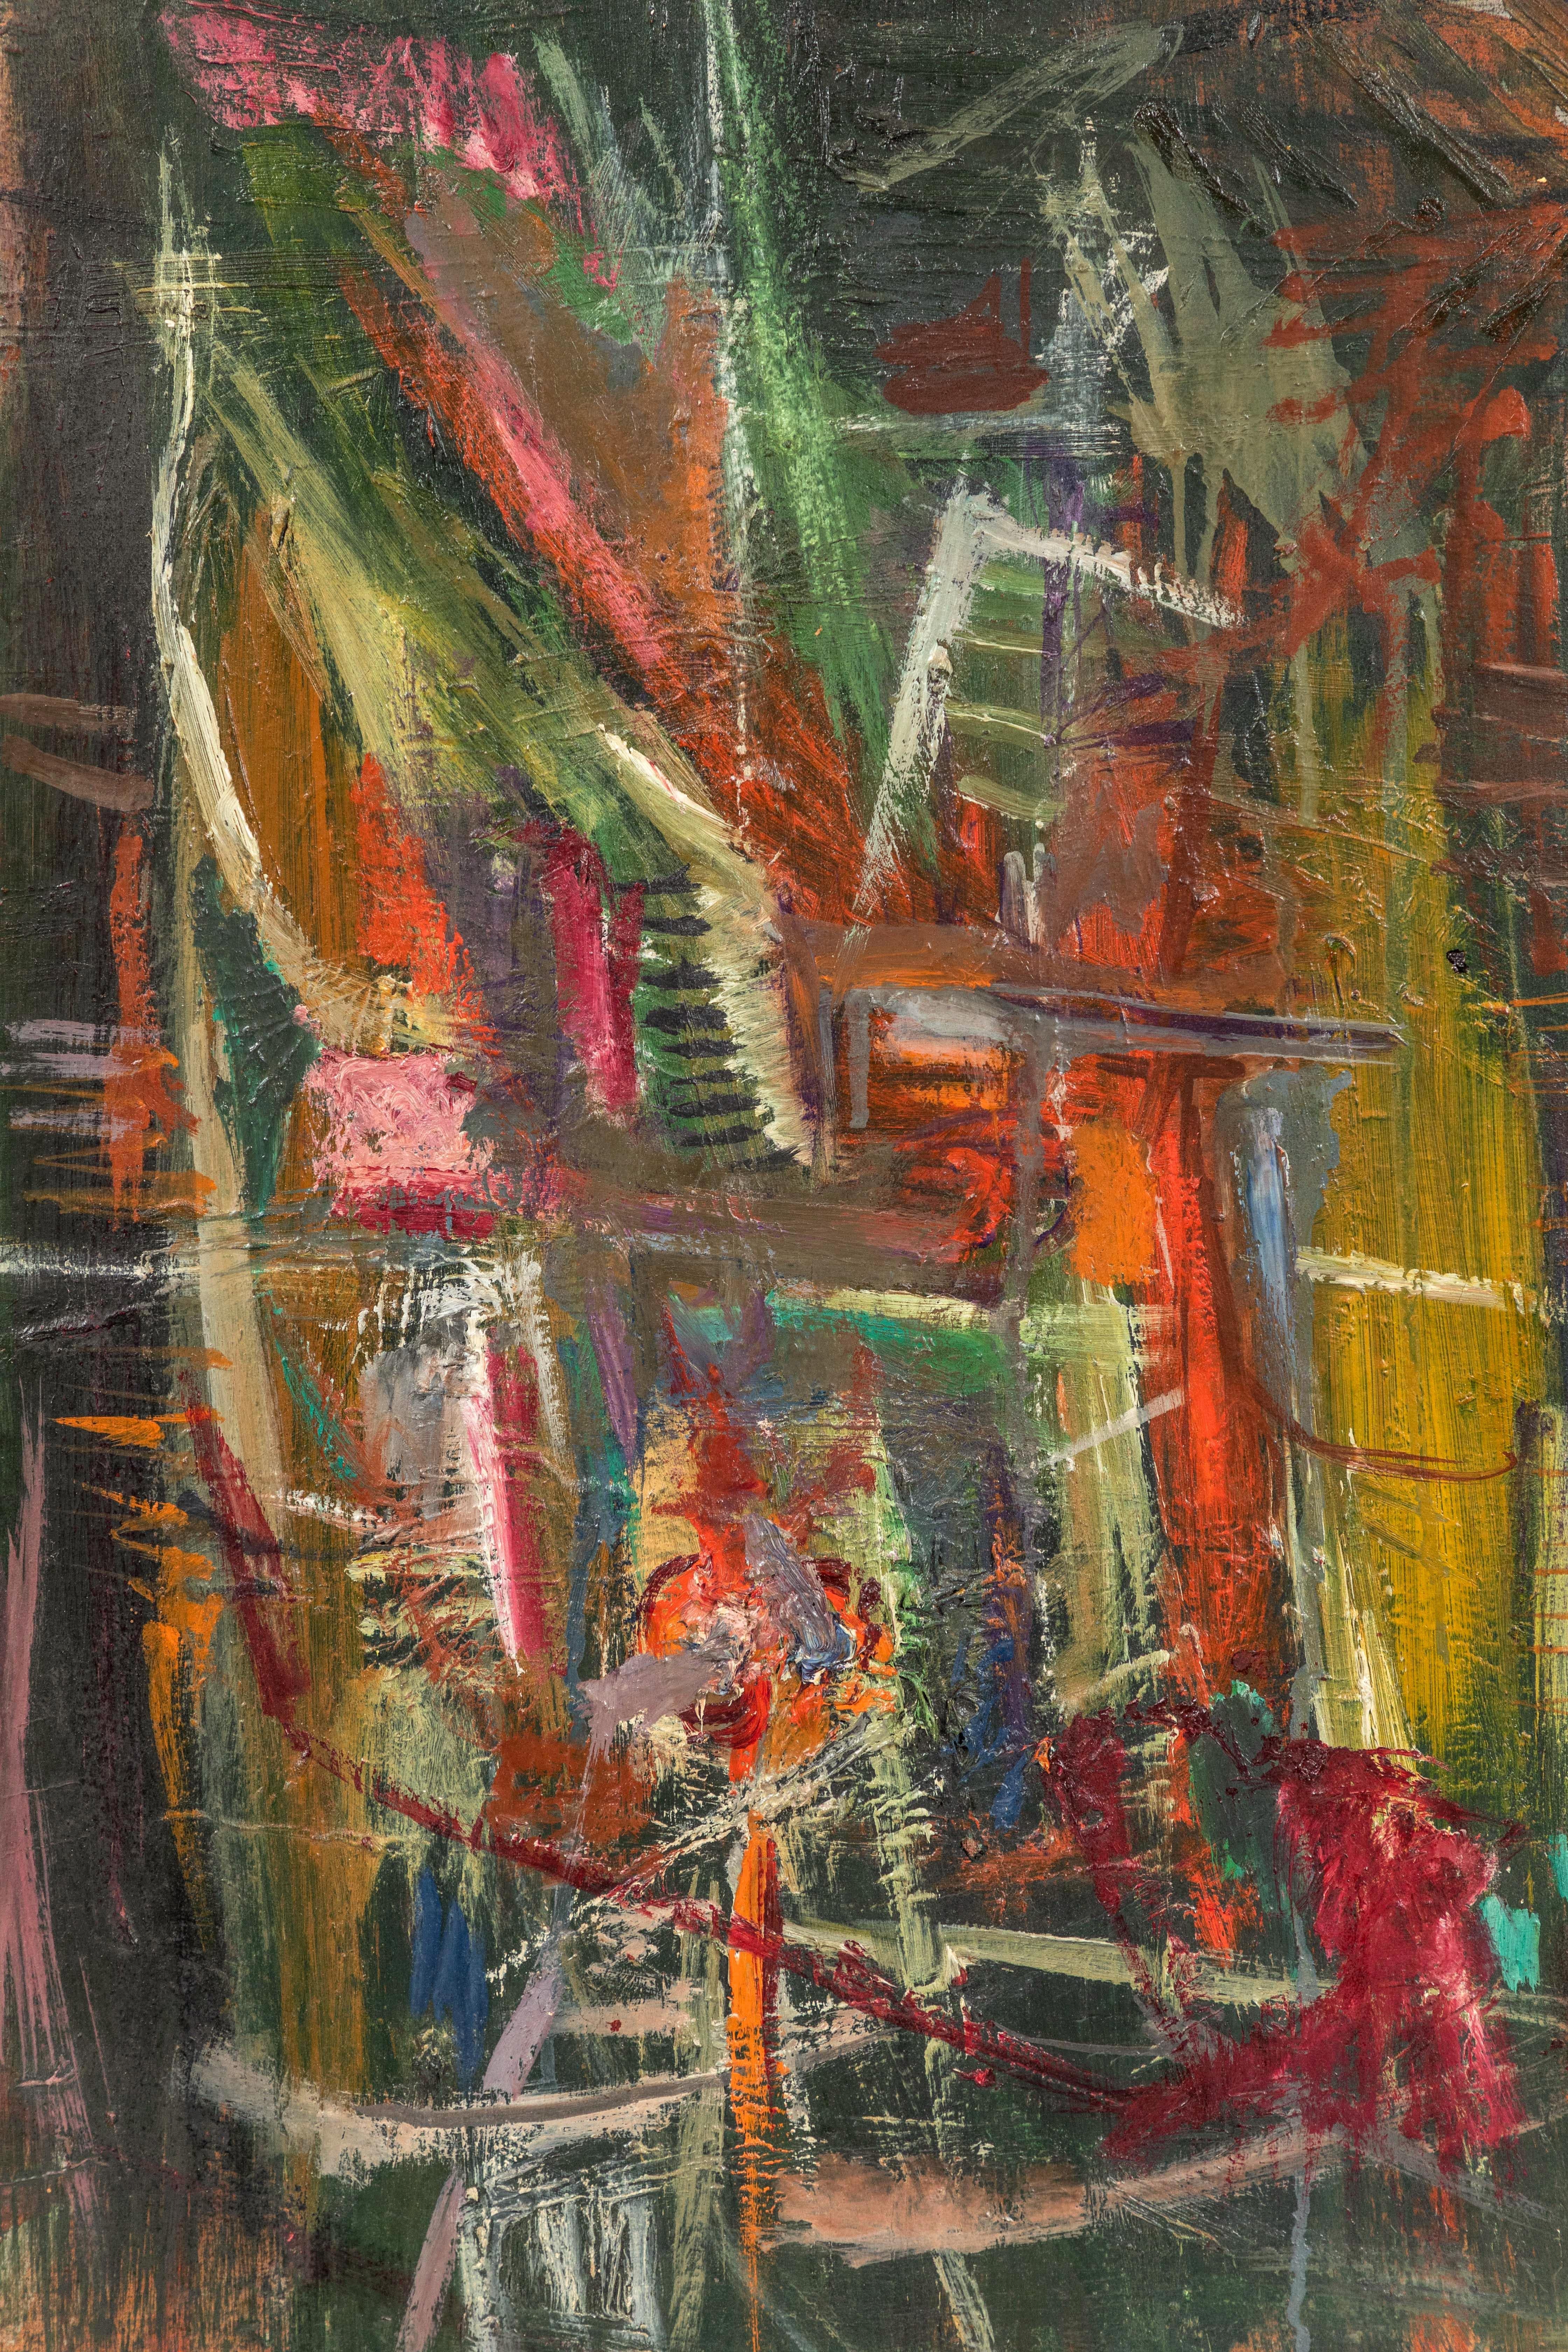 Midcentury, oil-on-board abstract painting by listed Florentine artist, Riccardo Guarnieri (b. 1933). Signed and dated 1958-1959 on the lower right. Titled and inscribed on the reverse: 